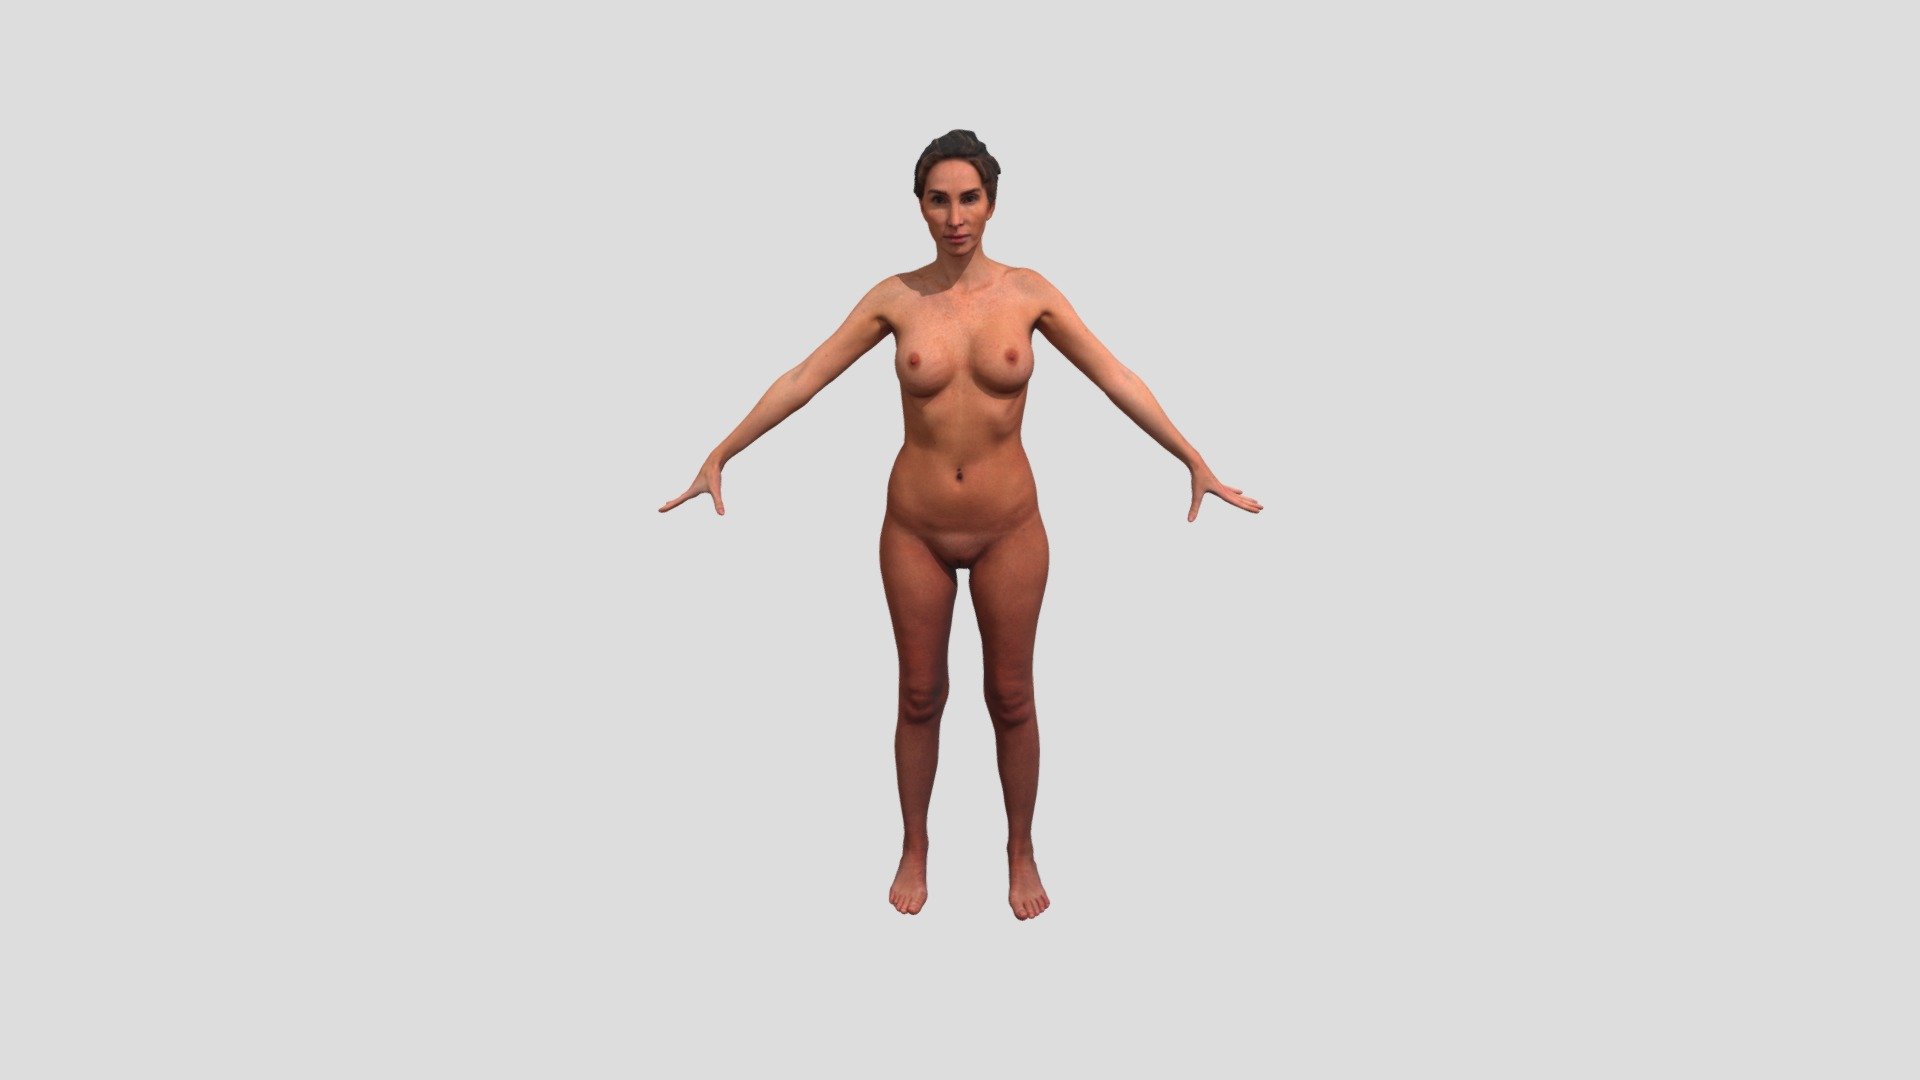 Real Life Human Scans is a project by 3Dsk which focus on diversity of human bodies, faces and expressions.

Ethnicity: white
Gender: female
Age: 36
Height: 178 cm
Weight: 68 kg

Technical Specifications:




OBJ file / 740 000 polys

8k / PNG diffuse texture

NOTE: This is a cleaned raw scan in Zbrush postproduction but no retopology.
This is the version with less poly without Zbrush file.

3Dsk Store provides all you need for 2D&amp;3D artist and game developers. Explore raw 3D scans &amp; retopologized models of head, hand, full body in A-pose or daily pose and props. And a variety of 2D references such as Photo set of standing and sitting man/woman, flexing &amp; expressions. Premade head texture, HD skin and HD eye details 3d model